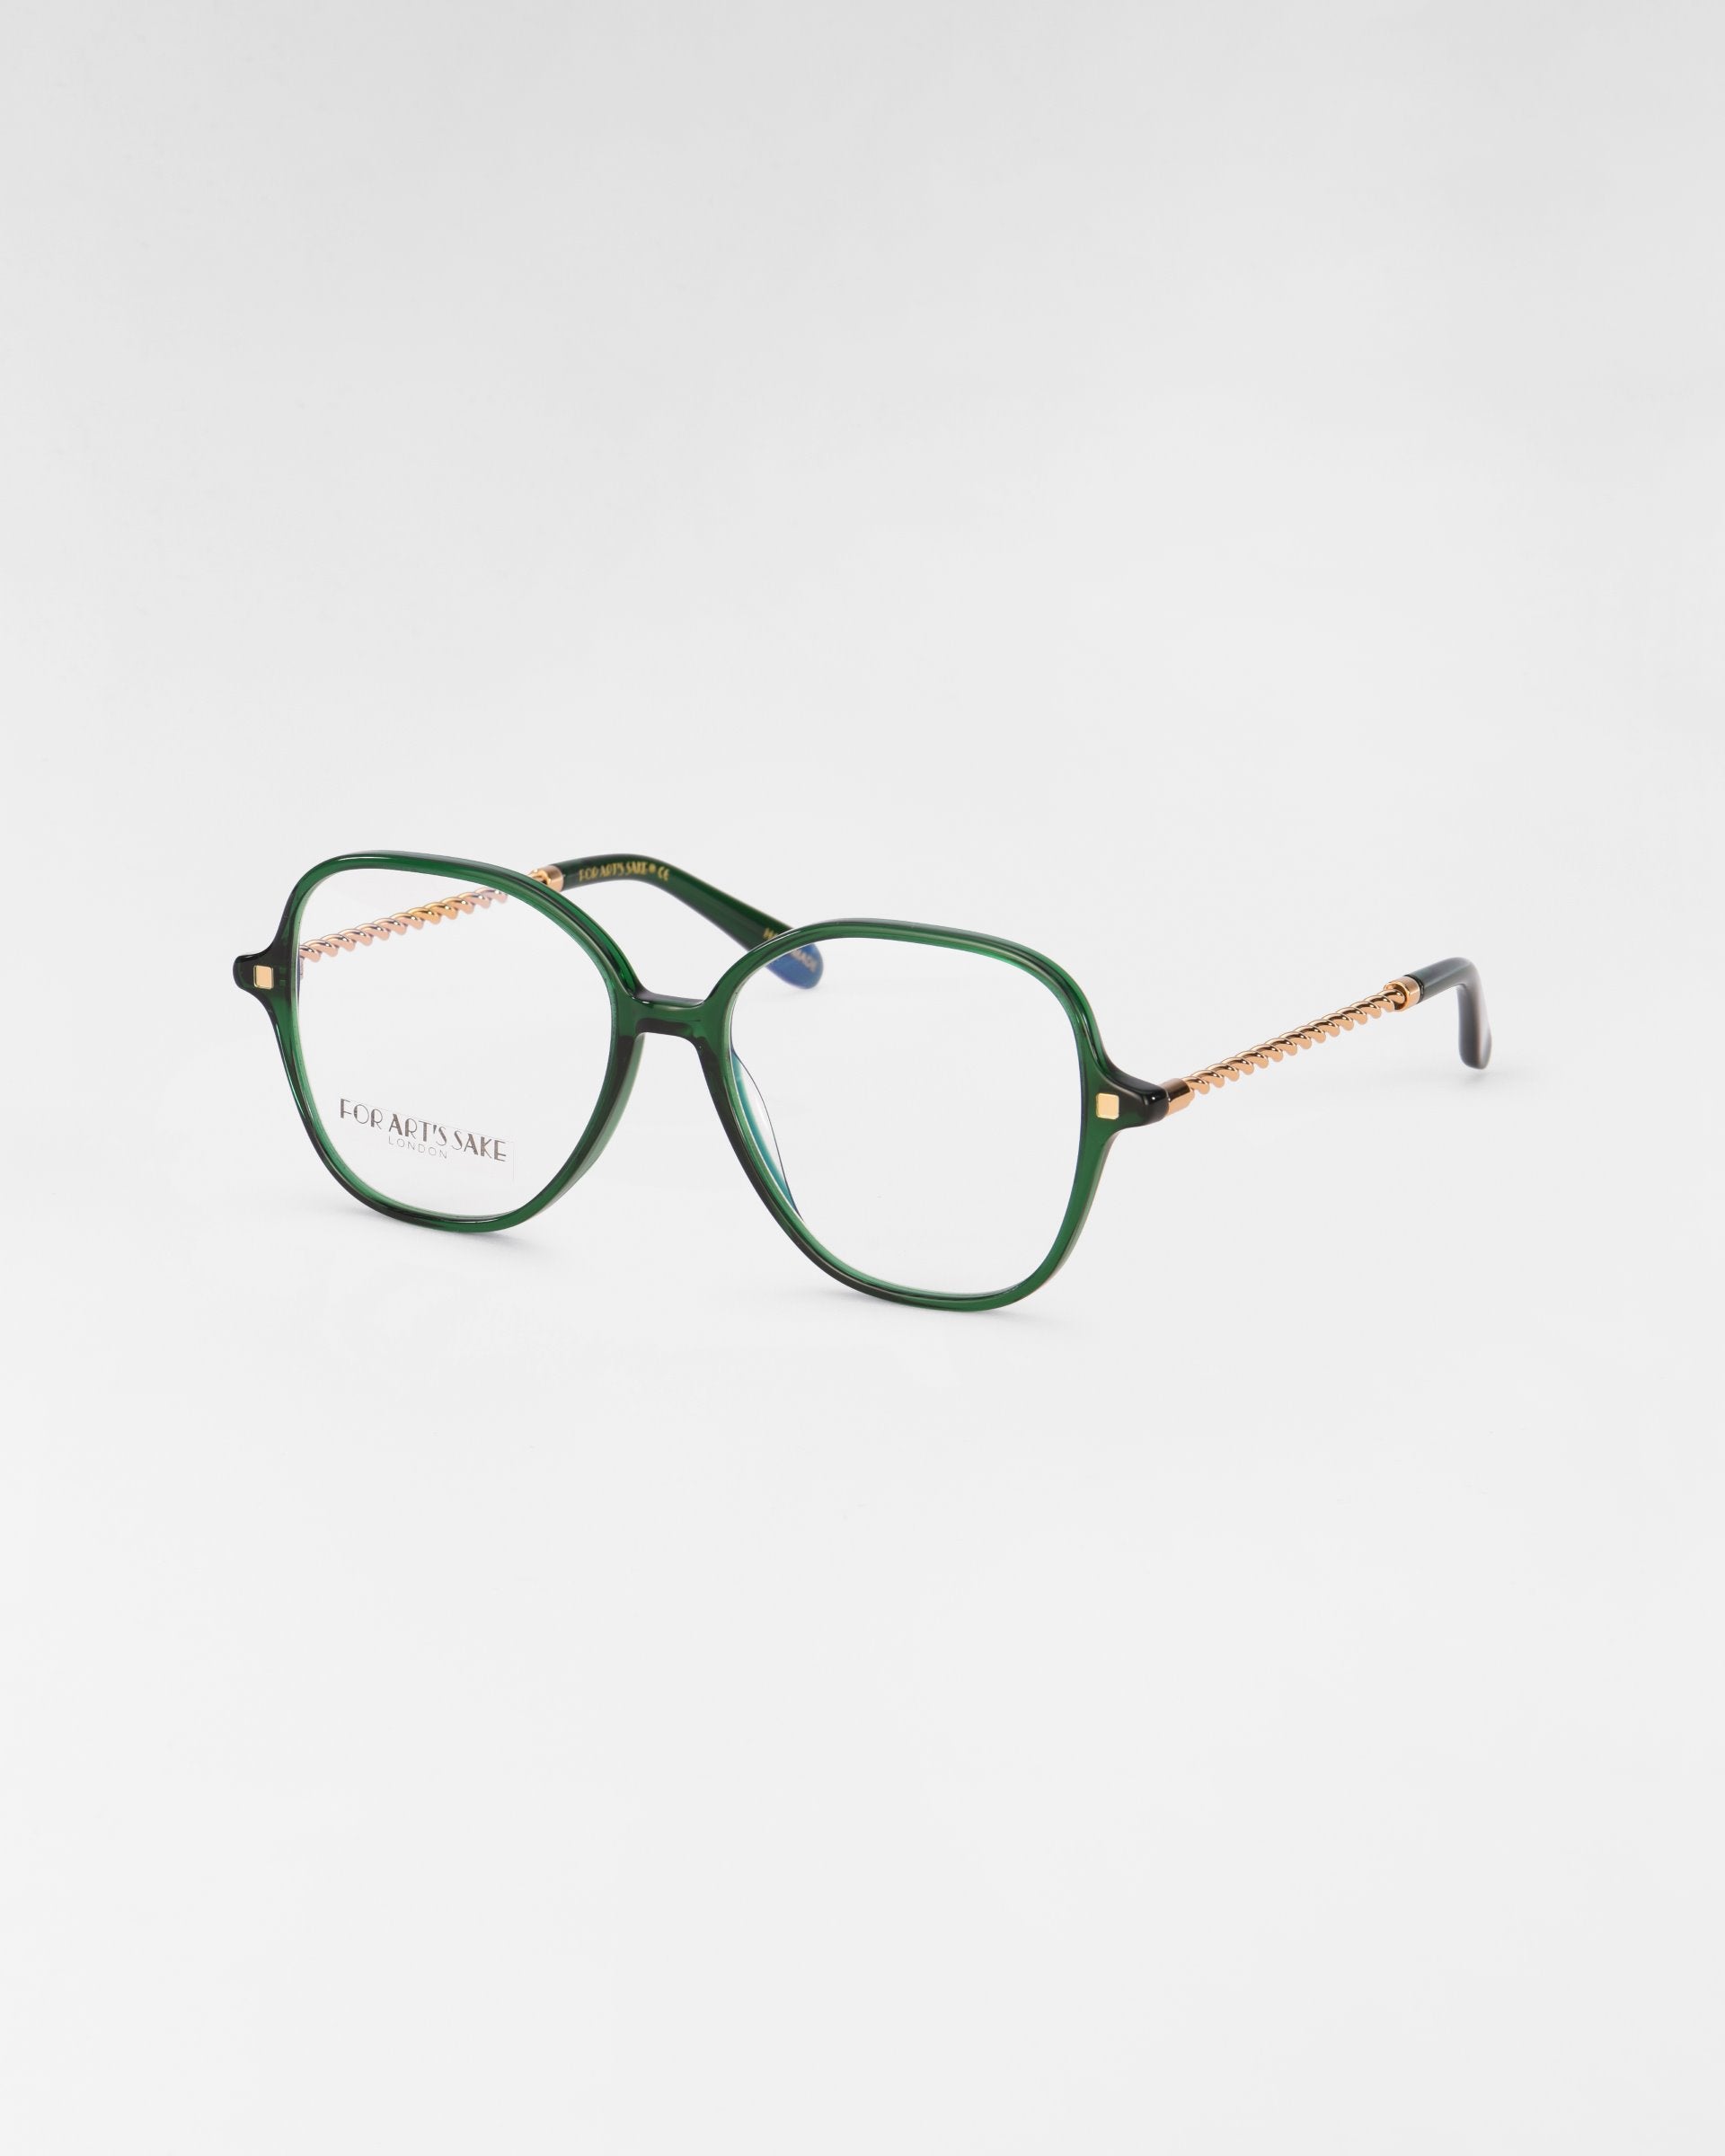 A pair of For Art&#39;s Sake® Dumpling eyeglasses with green rectangular frames and transparent lenses featuring a blue light filter. The temples are adorned with a textured gold pattern and have black tips. The product is displayed on a plain white background.